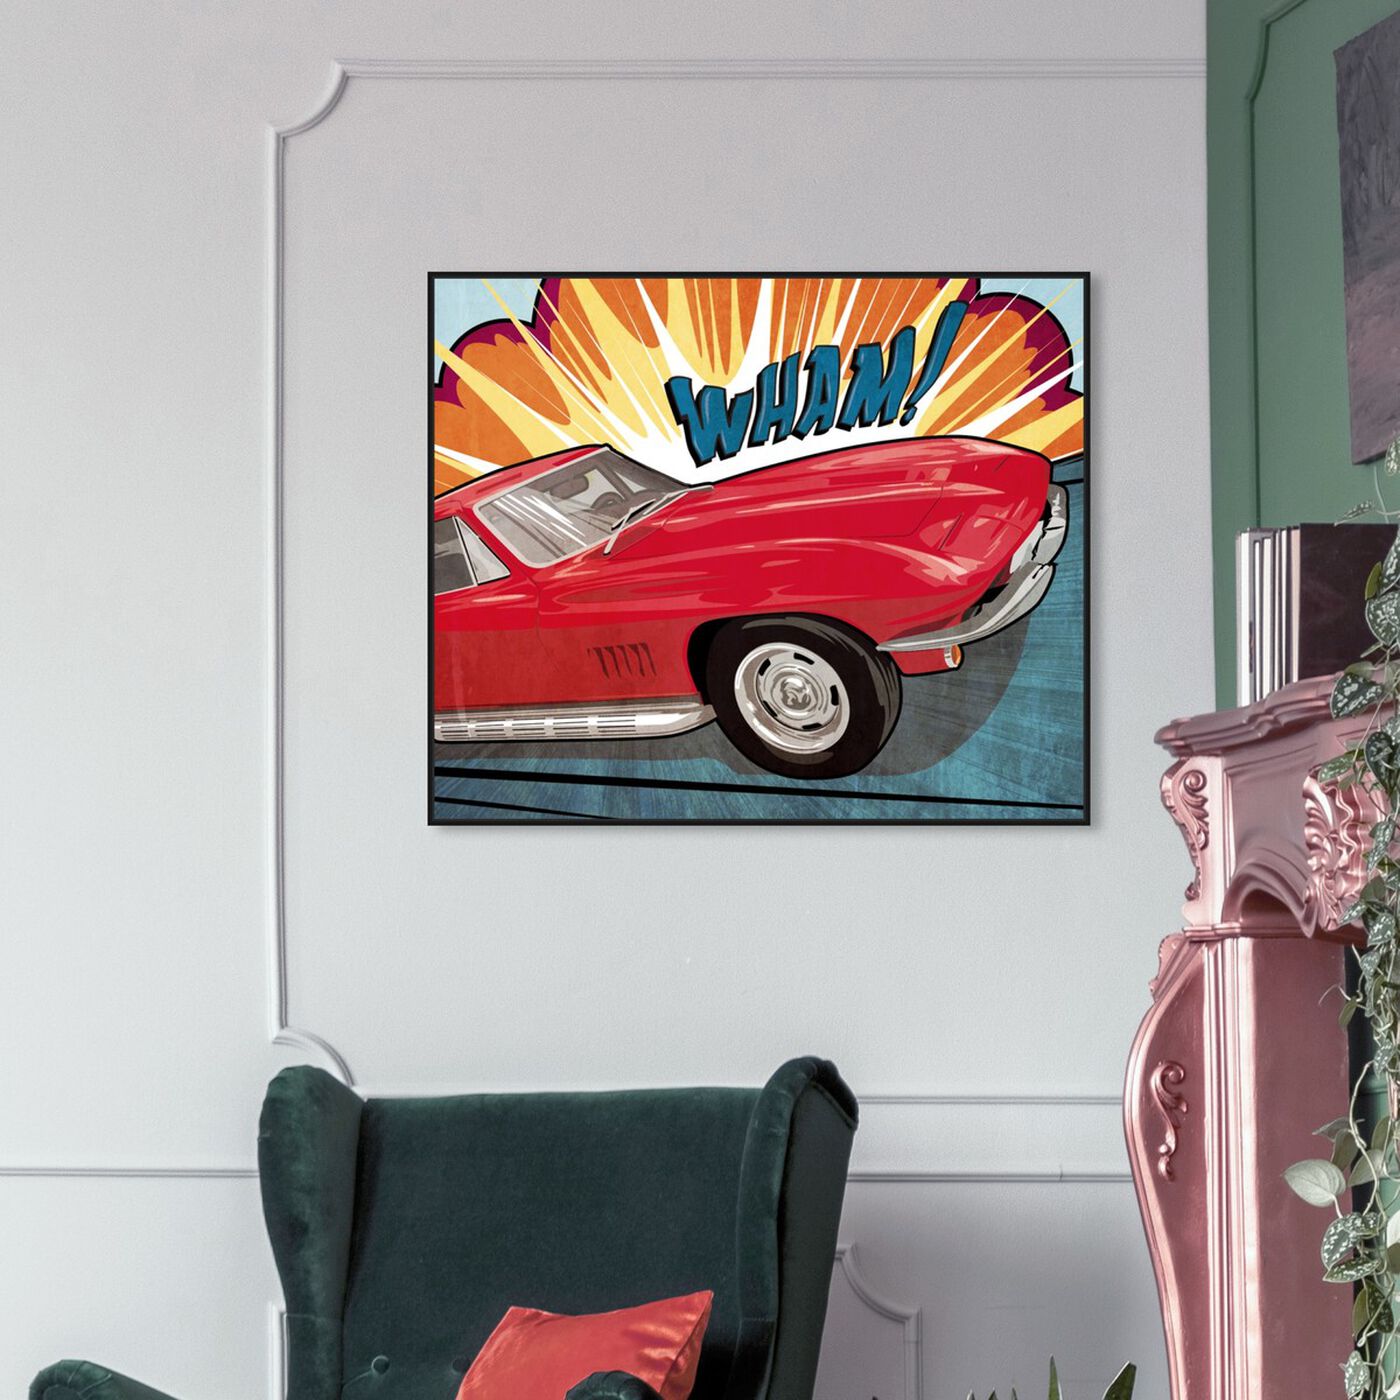 Hanging view of Wham featuring advertising and comics art.